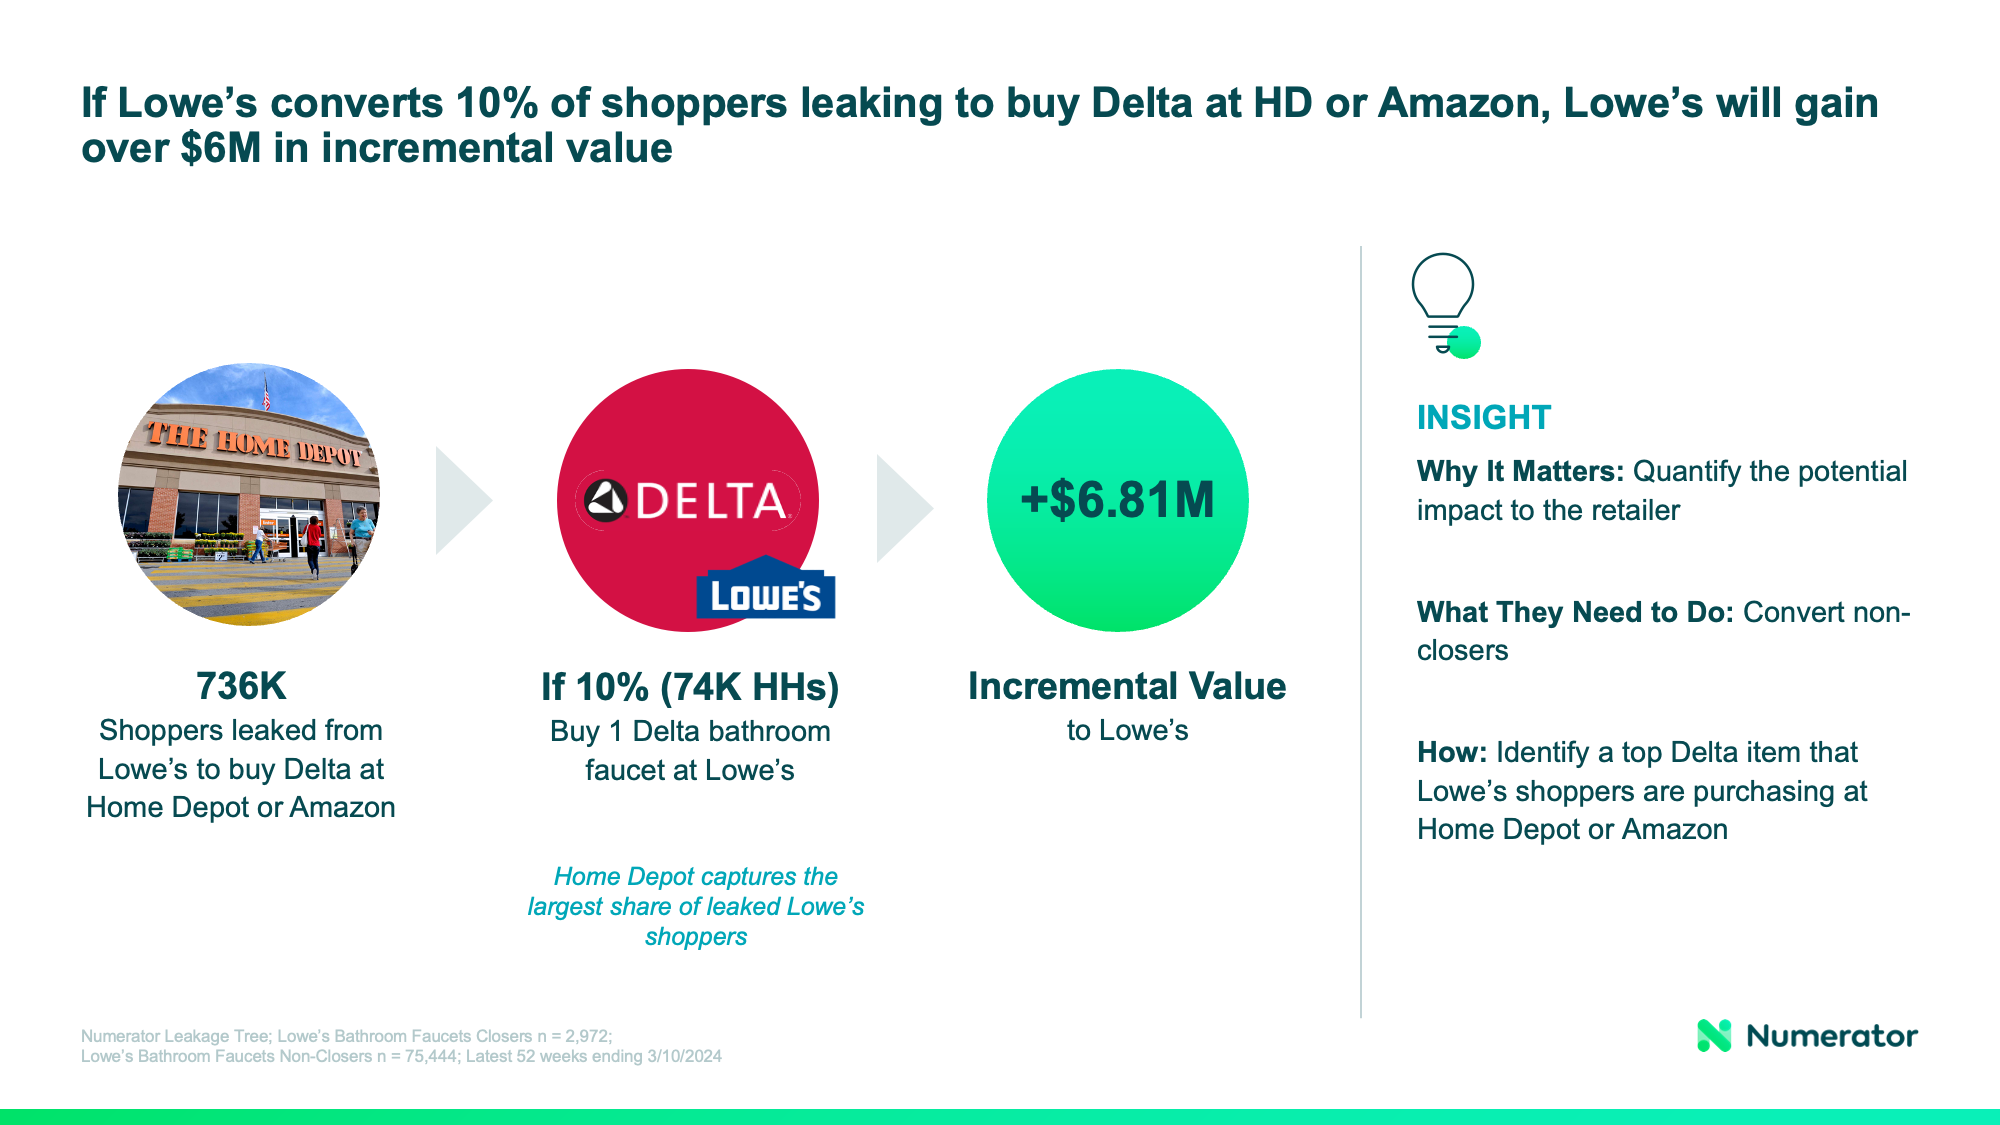 If Lowe's converts 10% of shoppers leaking to buy Delta at HD or Amazon, Lowe's will gain over $6M in incremental value